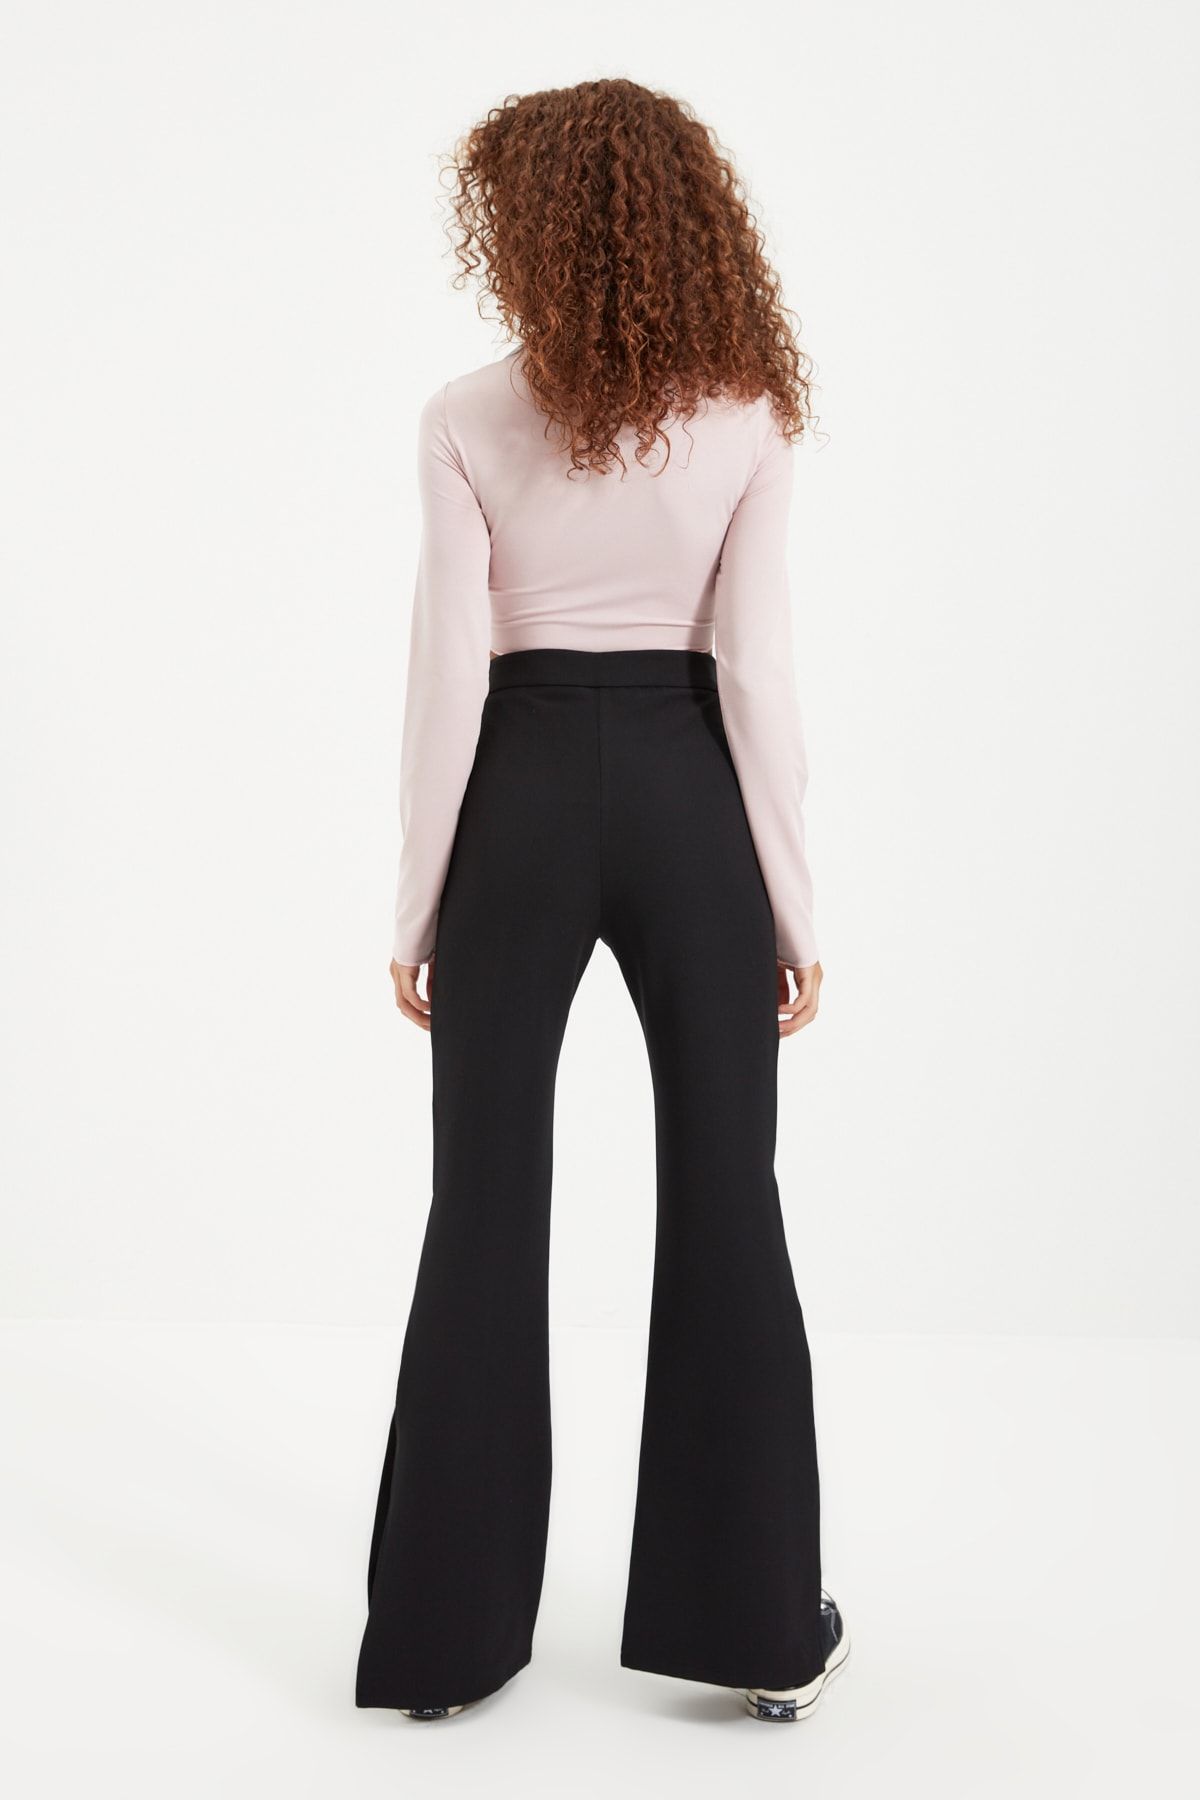 Black Woven High Waisted Flared Pants